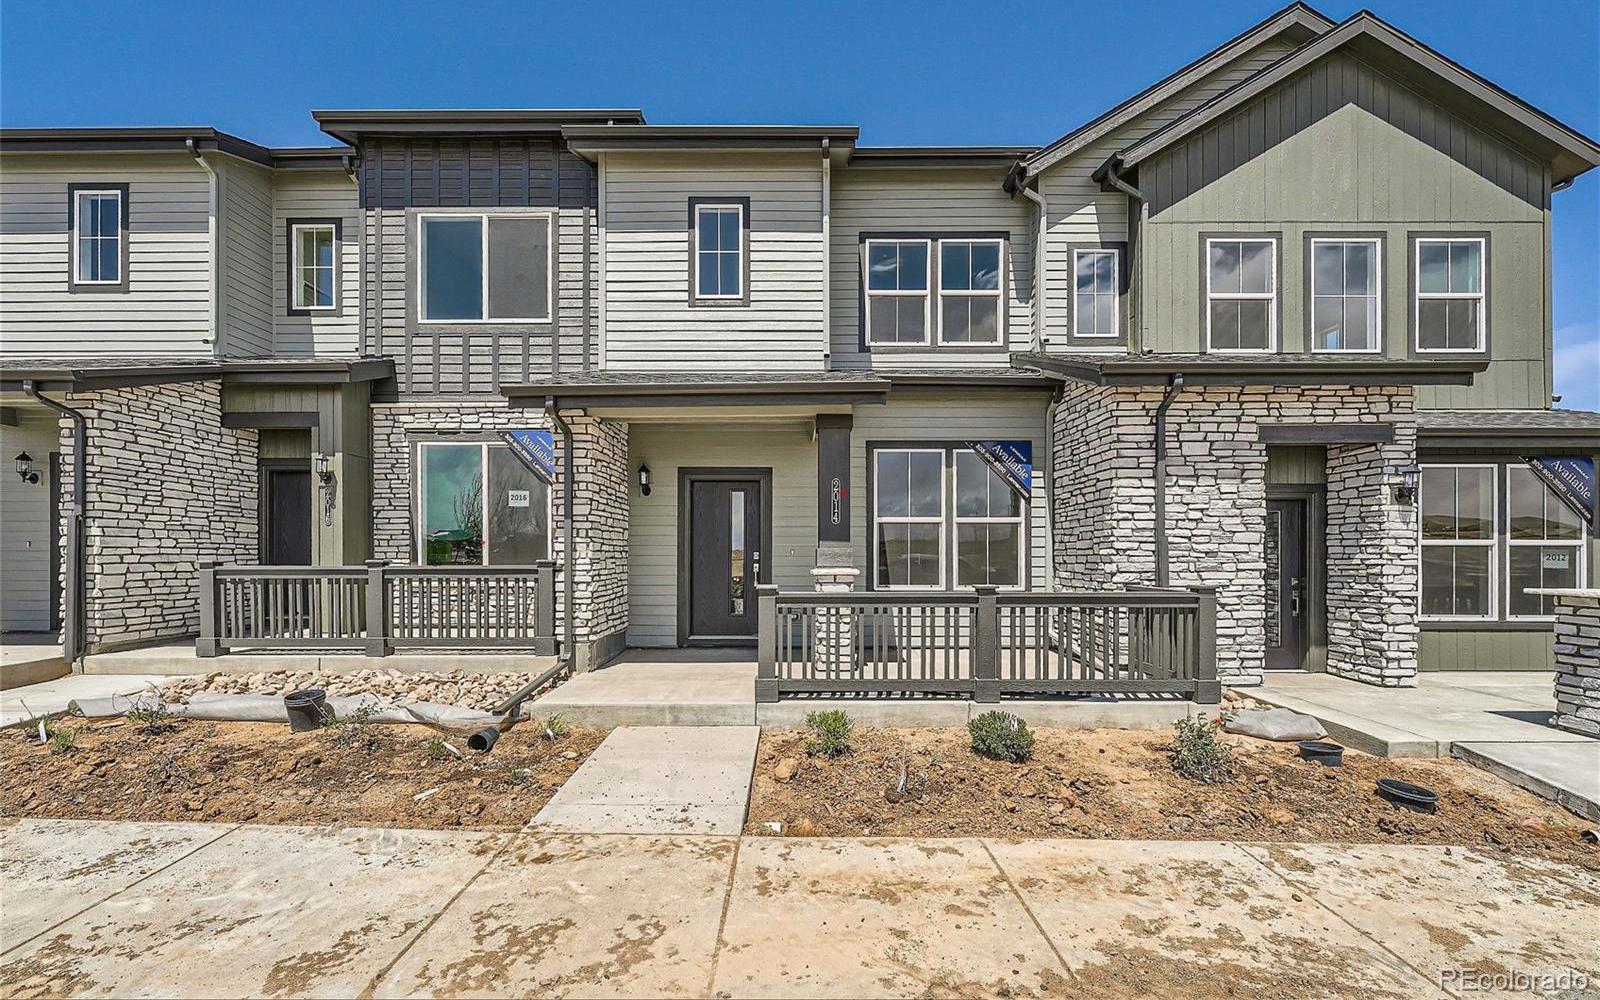 Photo one of 2014 S Gold Bug Way Aurora CO 80018 | MLS 3314493